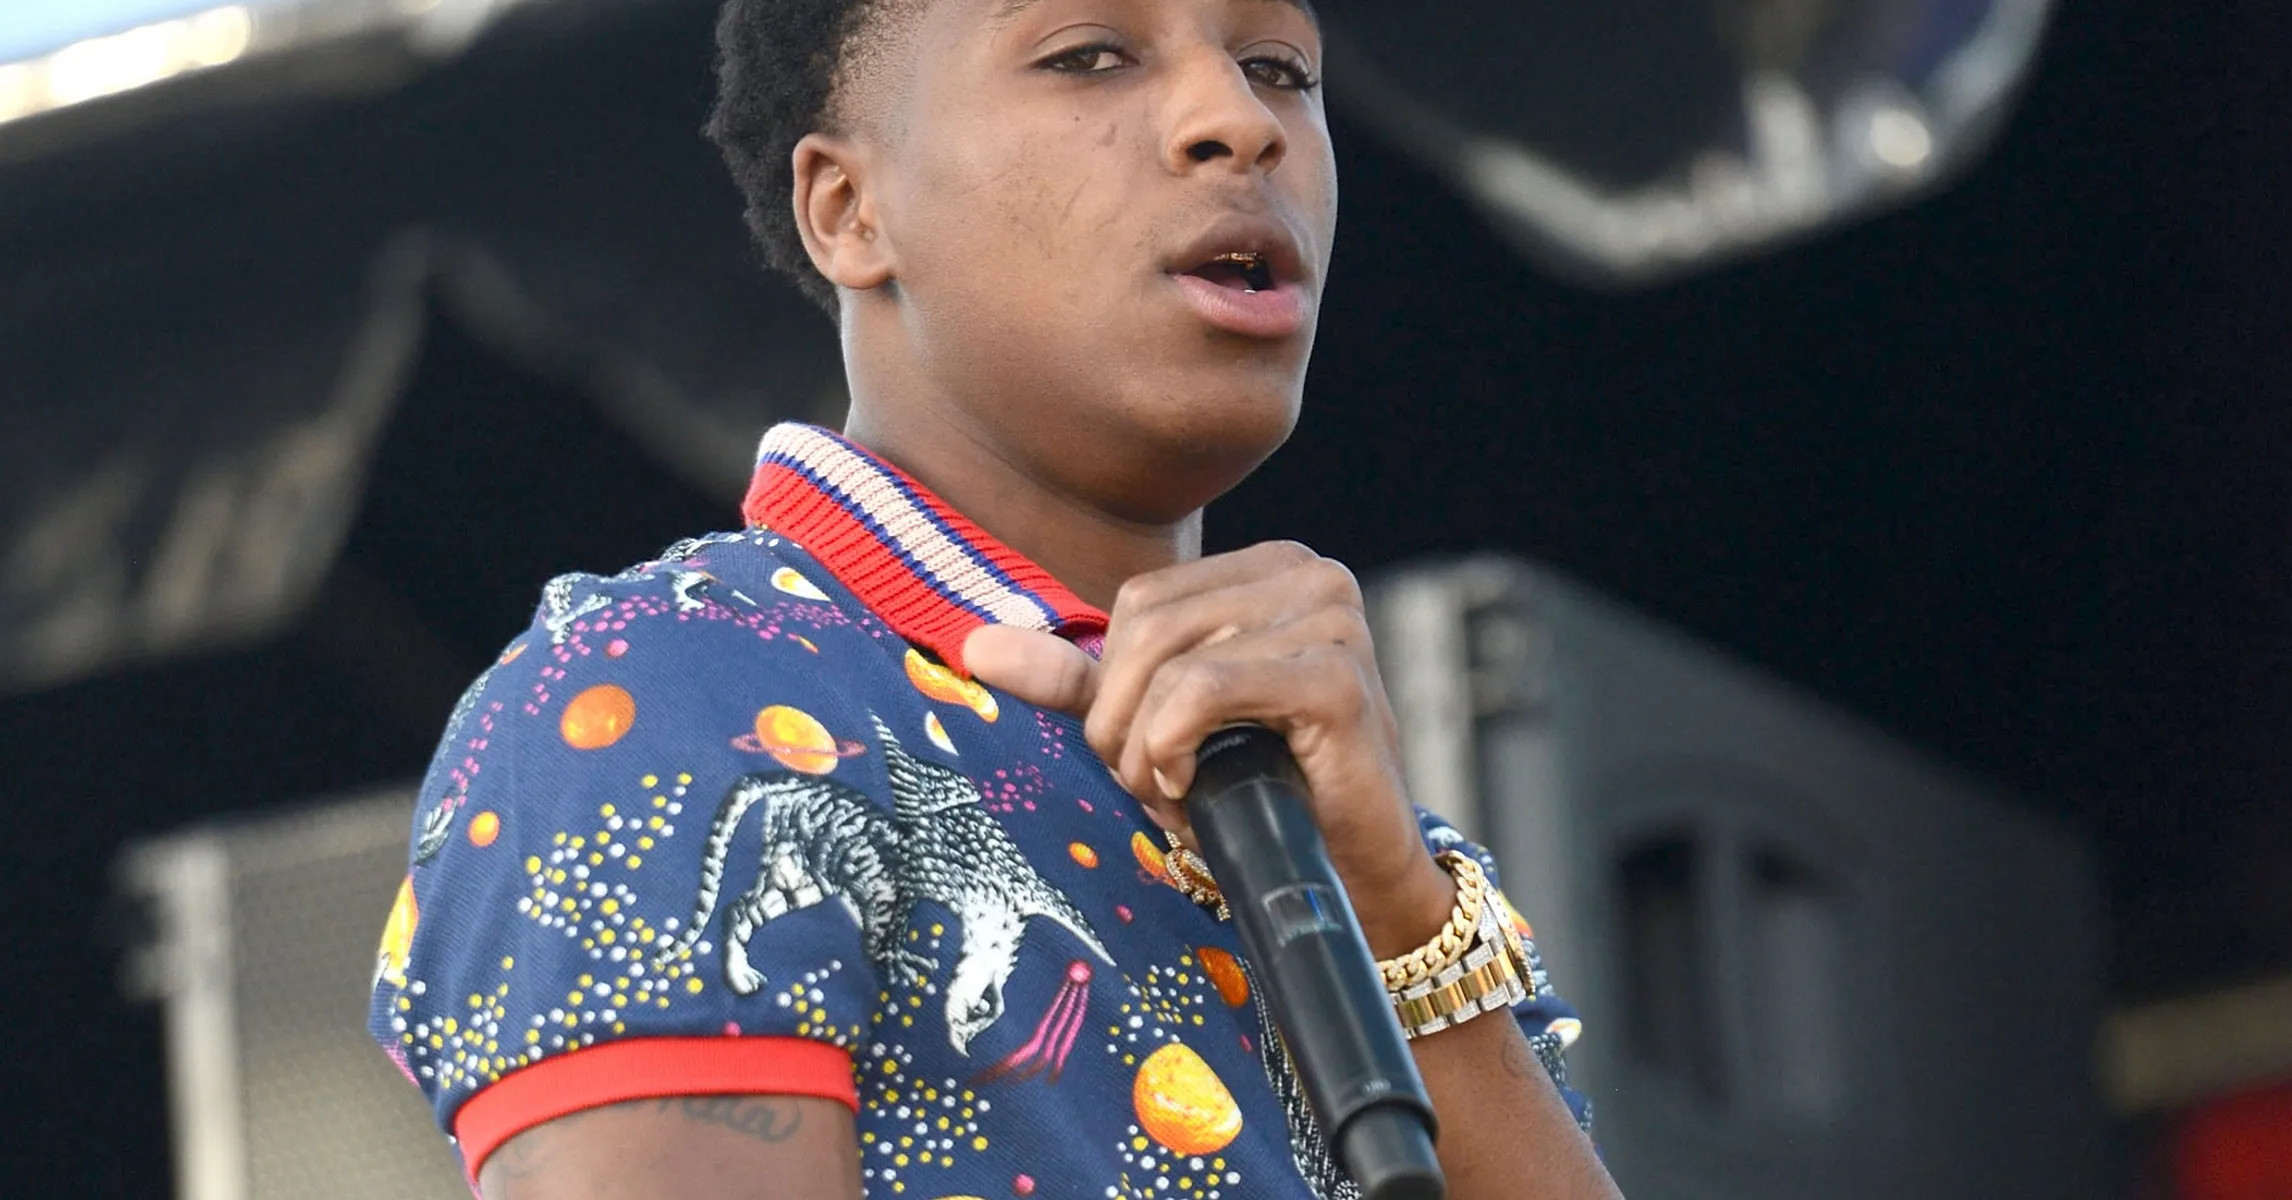 NBA YoungBoy’s Bad Doctor Impression Allegedly Got Him Caught In Prescription Fraud Scheme